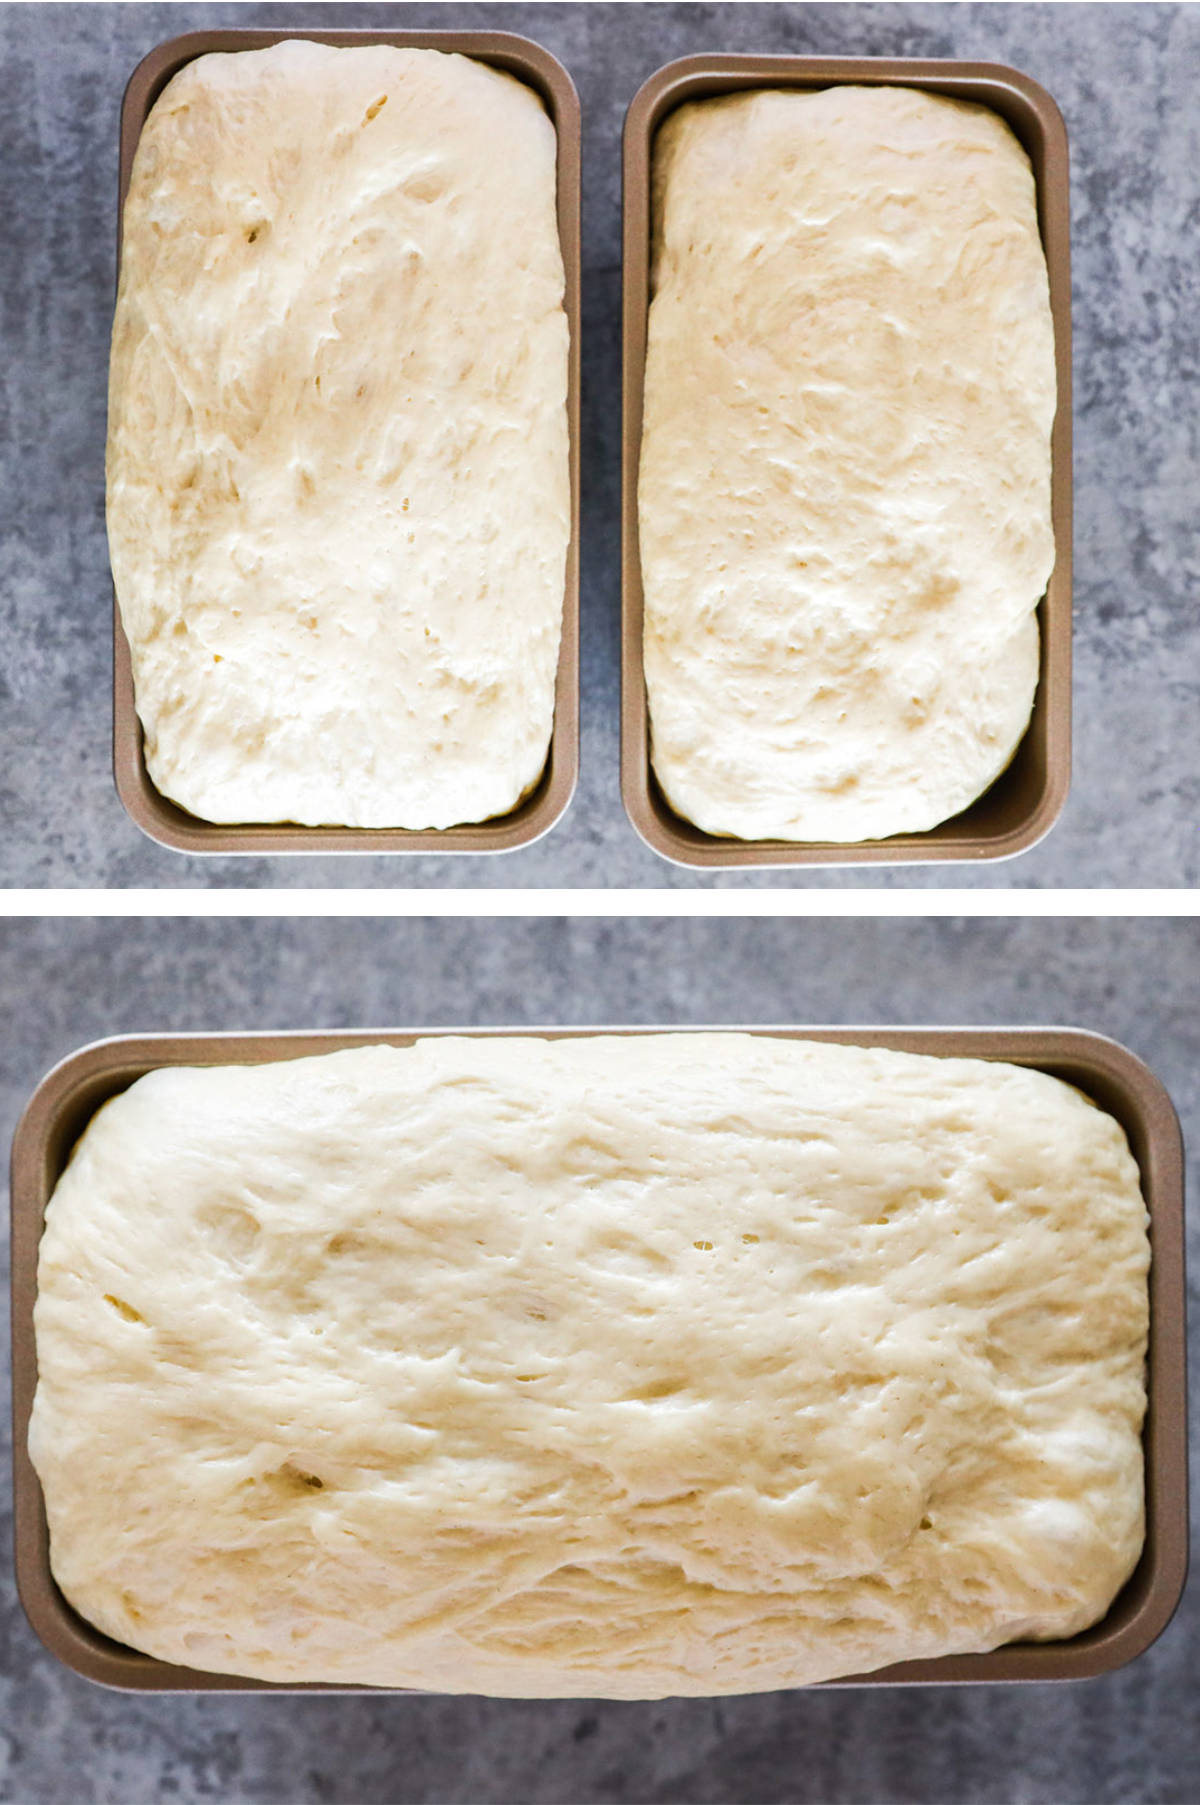 Two overhead images in one: 1. Two loaf pans with dough that has risen 1 inch above the pan. 2. Closeup of one of the pans with dough that has risen 1 inch above the pan. 